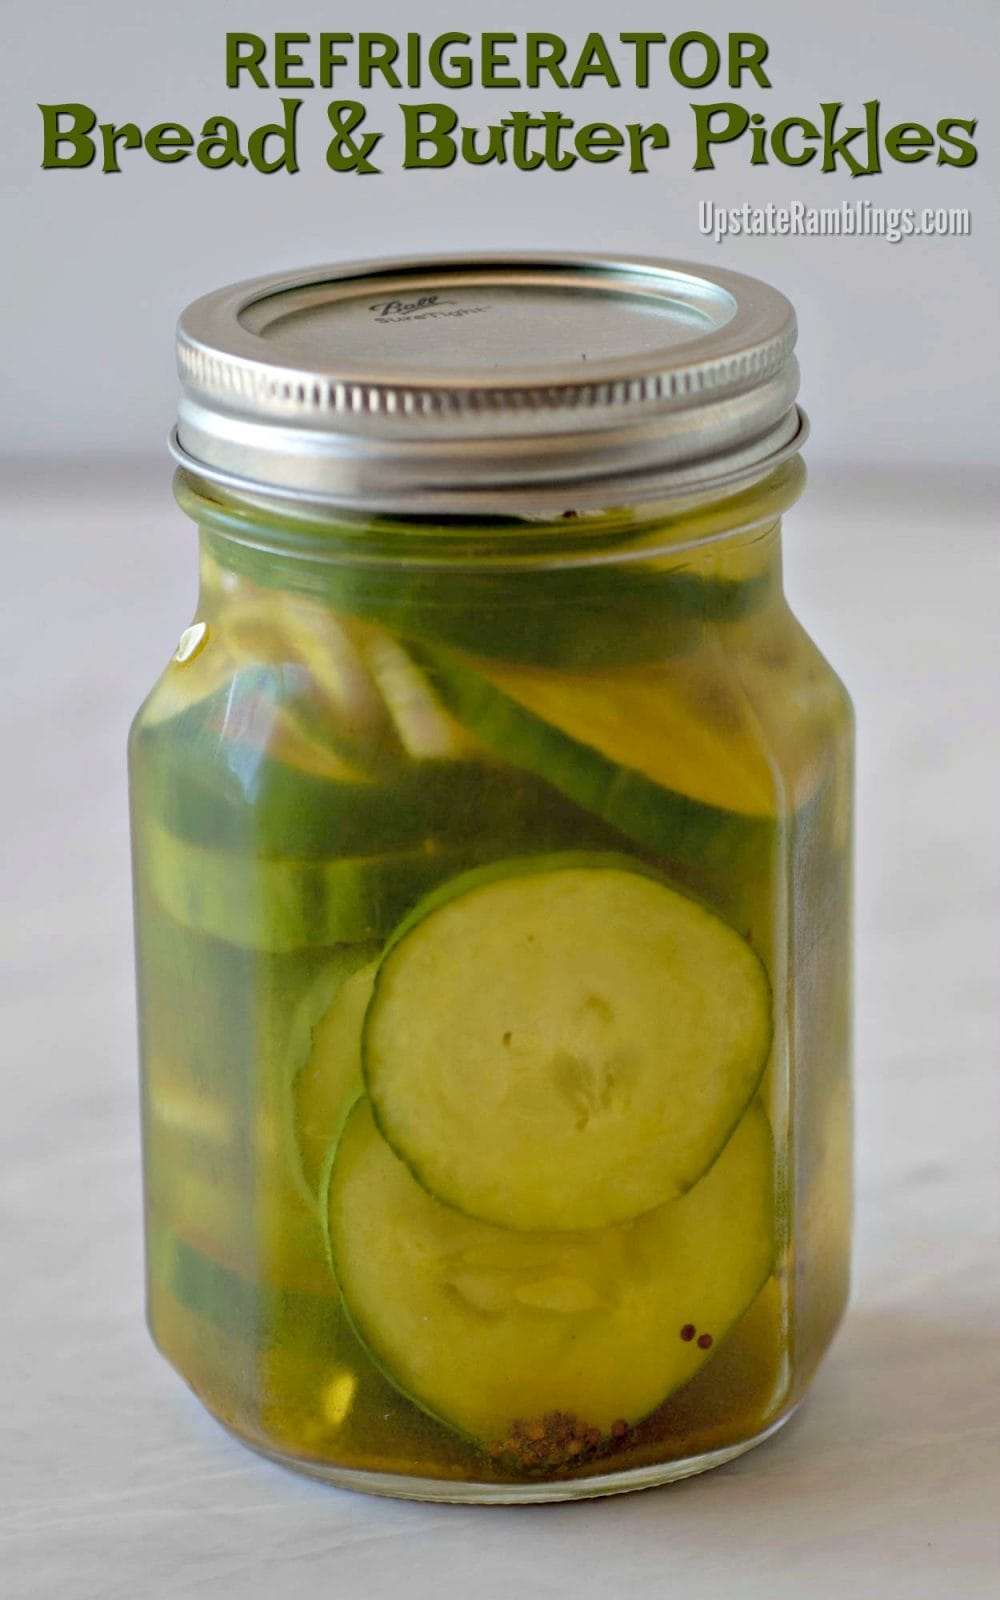 Refrigerator Bread and Butter Pickles - Upstate Ramblings